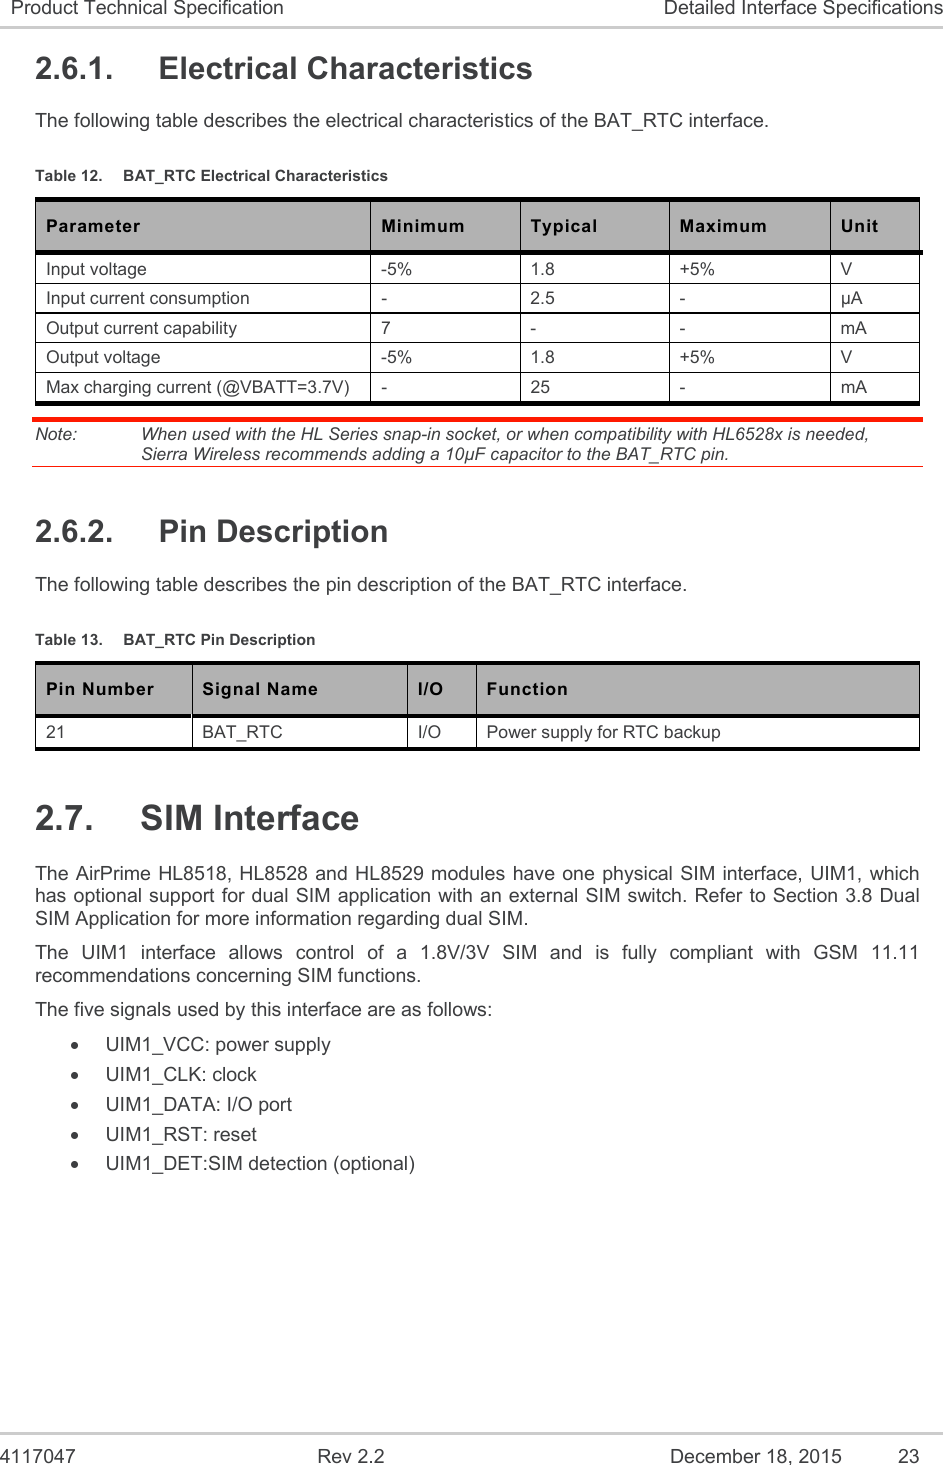  4117047  Rev 2.2  December 18, 2015  23 Product Technical Specification  Detailed Interface Specifications 2.6.1.  Electrical Characteristics The following table describes the electrical characteristics of the BAT_RTC interface. Table 12.  BAT_RTC Electrical Characteristics Parameter  Minimum  Typical  Maximum  Unit Input voltage  -5%  1.8  +5%  V Input current consumption  -  2.5   -  µA Output current capability  7  -  -  mA Output voltage  -5%  1.8  +5%  V Max charging current (@VBATT=3.7V)  -  25  -  mA Note:   When used with the HL Series snap-in socket, or when compatibility with HL6528x is needed, Sierra Wireless recommends adding a 10µF capacitor to the BAT_RTC pin.  2.6.2.  Pin Description The following table describes the pin description of the BAT_RTC interface. Table 13.  BAT_RTC Pin Description Pin Number  Signal Name  I/O  Function 21  BAT_RTC  I/O  Power supply for RTC backup 2.7.  SIM Interface The AirPrime HL8518, HL8528 and  HL8529 modules have one physical SIM interface, UIM1, which has optional support for dual SIM application with an external SIM switch. Refer to Section 3.8 Dual SIM Application for more information regarding dual SIM. The  UIM1  interface  allows  control  of  a  1.8V/3V  SIM  and  is  fully  compliant  with  GSM  11.11 recommendations concerning SIM functions. The five signals used by this interface are as follows:   UIM1_VCC: power supply   UIM1_CLK: clock   UIM1_DATA: I/O port   UIM1_RST: reset   UIM1_DET:SIM detection (optional) 